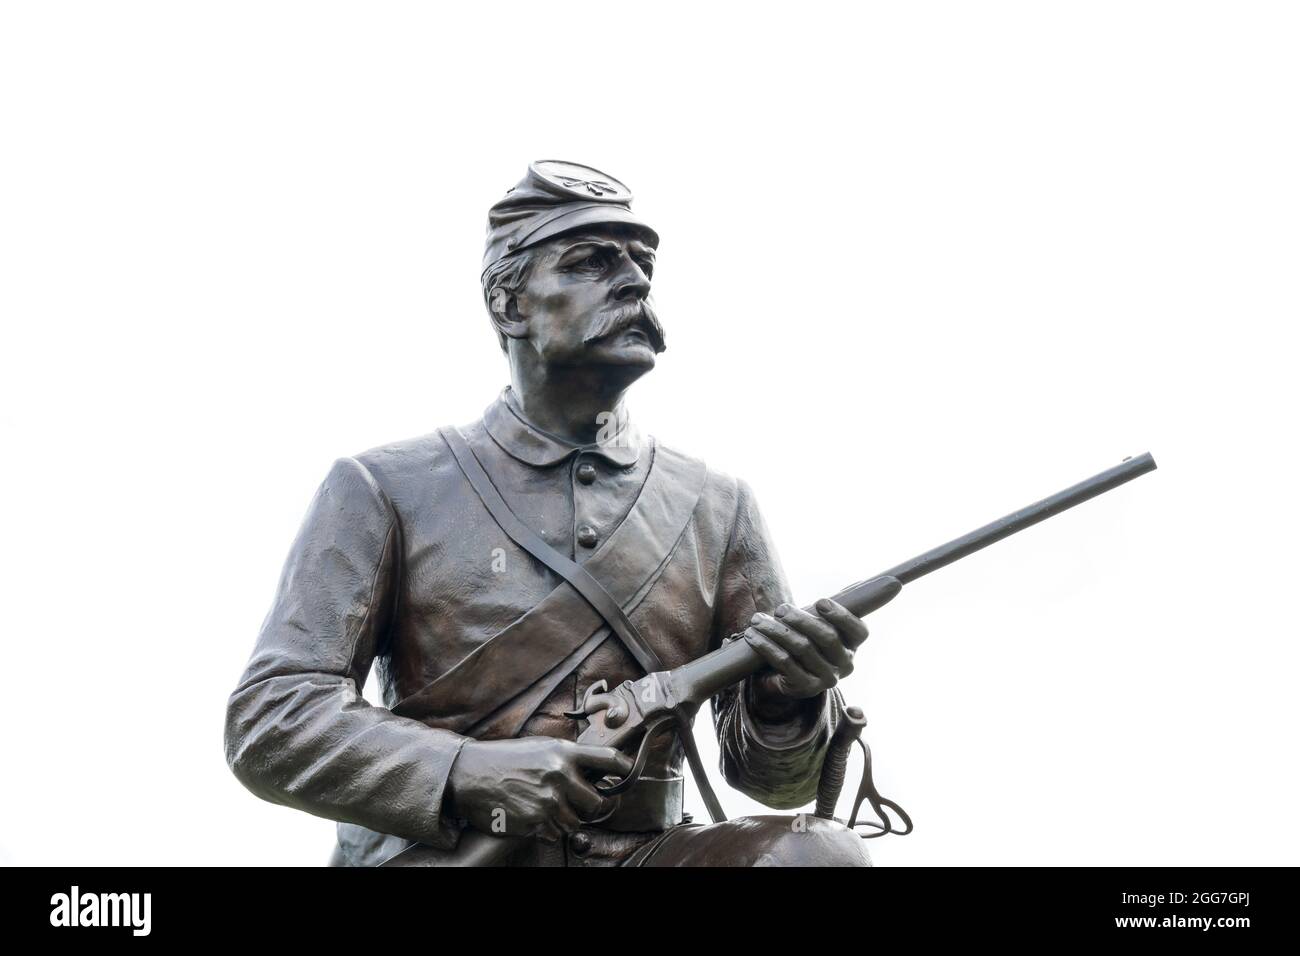 Gettysburg, PA - Sept. 10, 2020: Detail of the statue on the Monument to the 1st Pennsylvania Cavalry. at Gettysburg National Military Park. Stock Photo